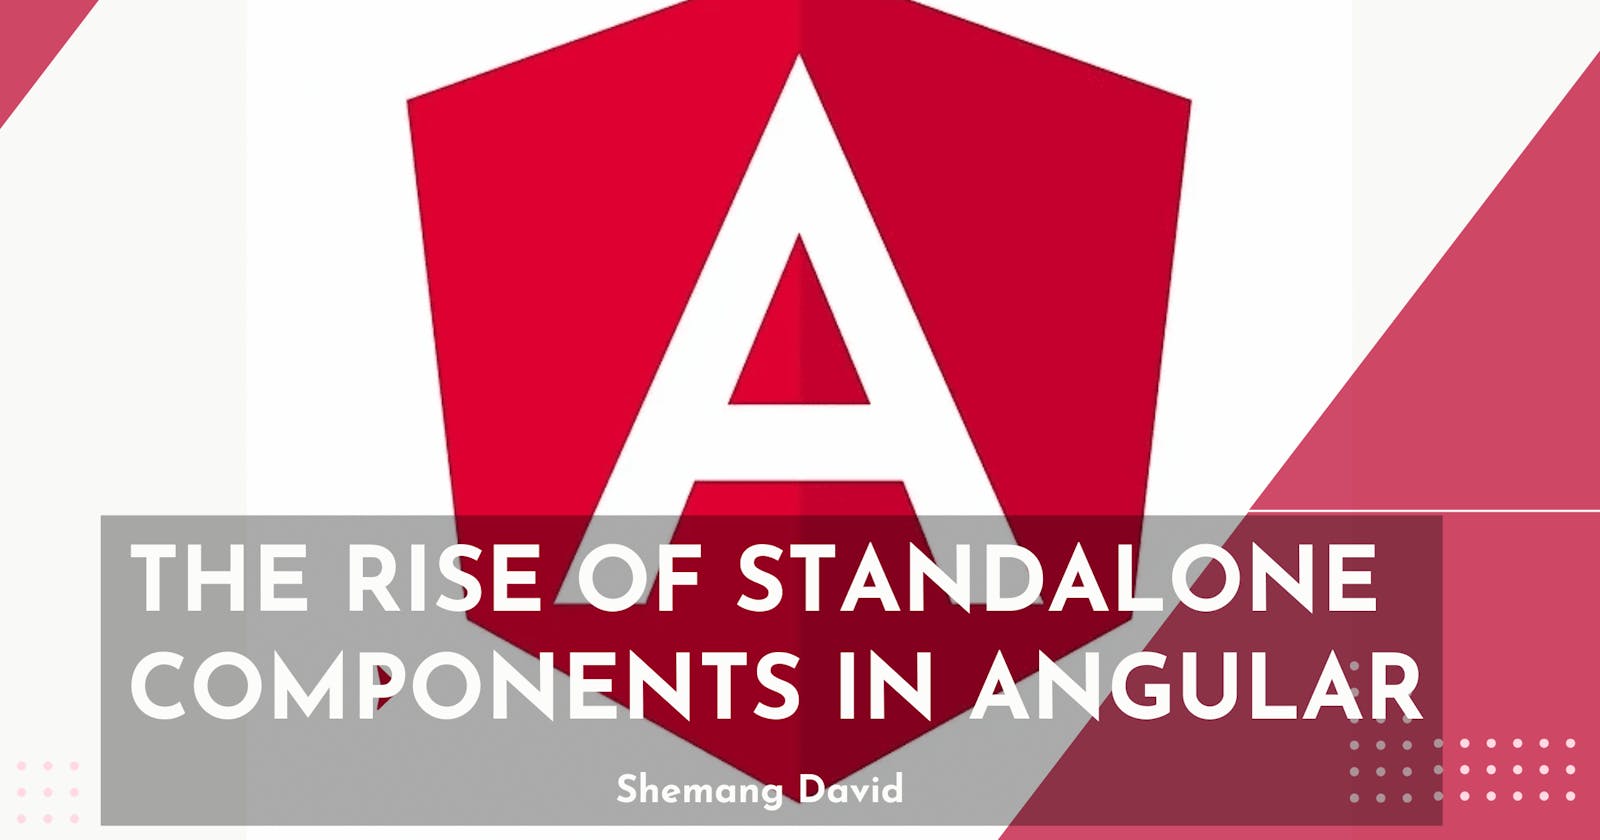 The Rise of Standalone Components in Angular